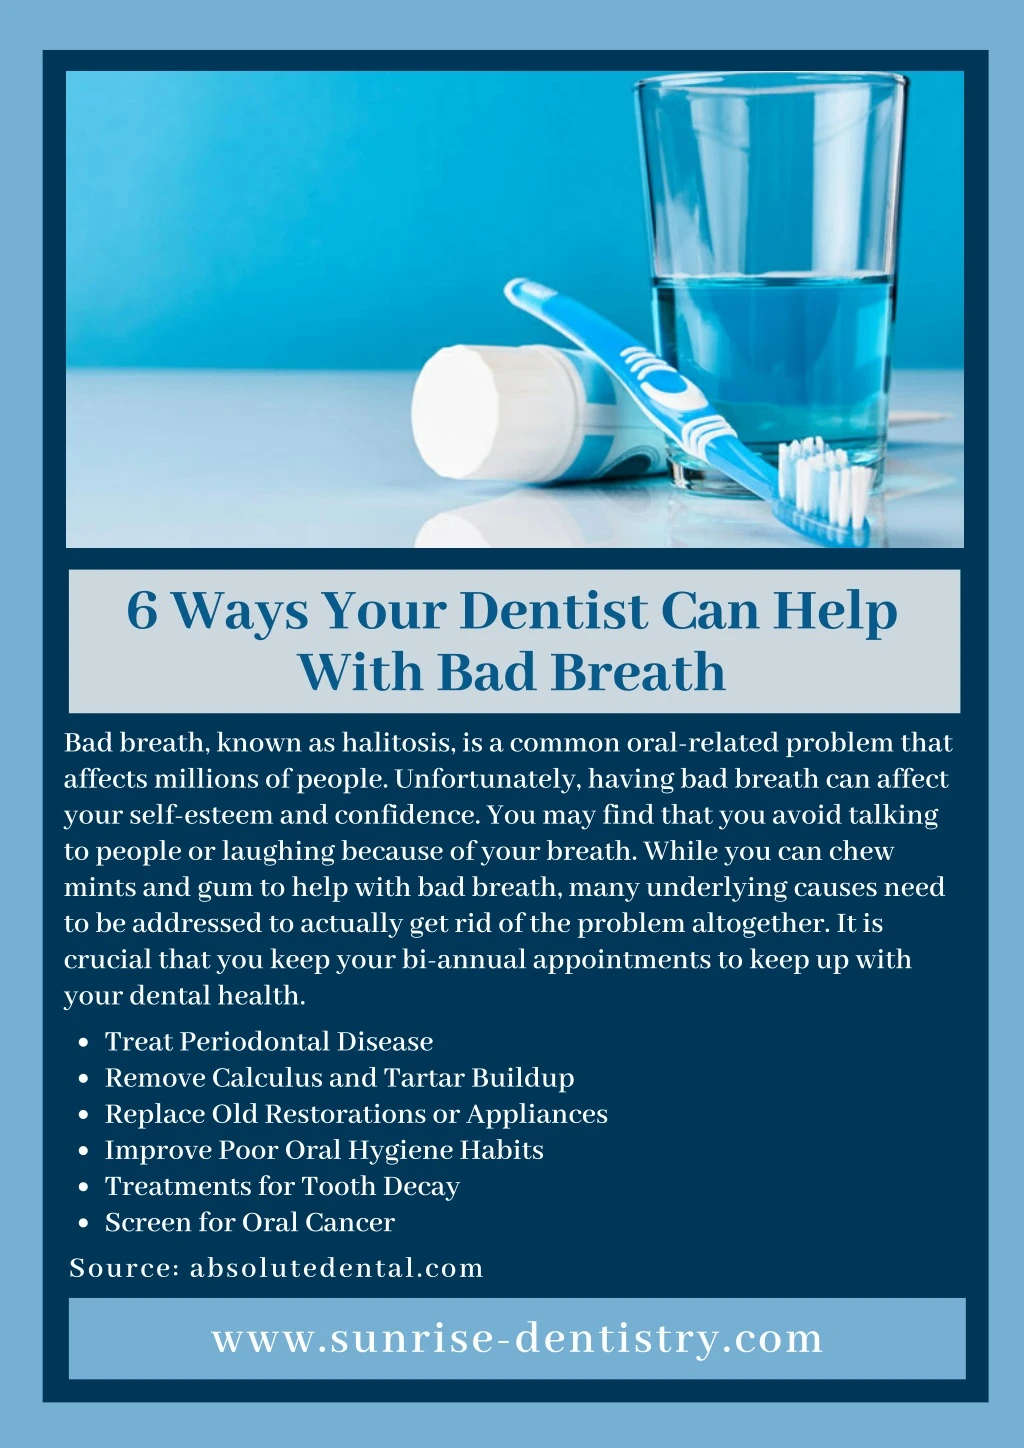 6 ways your dentist can help with bad breath